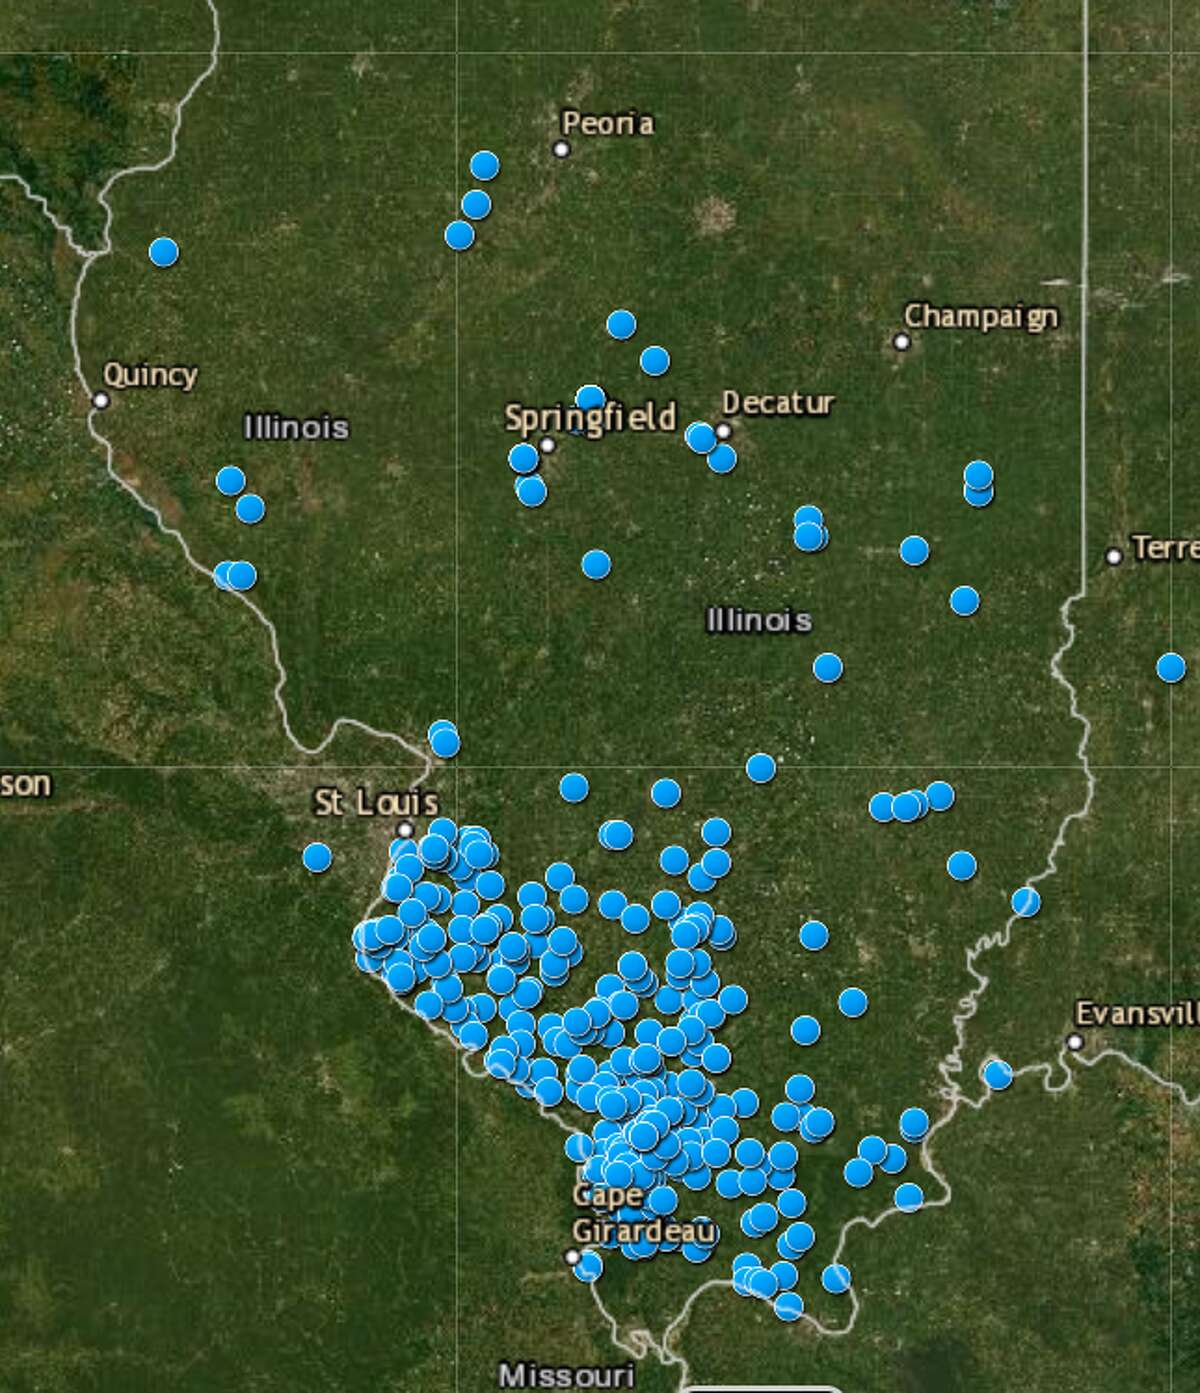 The Illinois Department of Natural Resources is monitoring the expansion of armadillos into central and northern Illinois. The dots on the map represent locations where an armadillo was sighted and reported to the DNR.